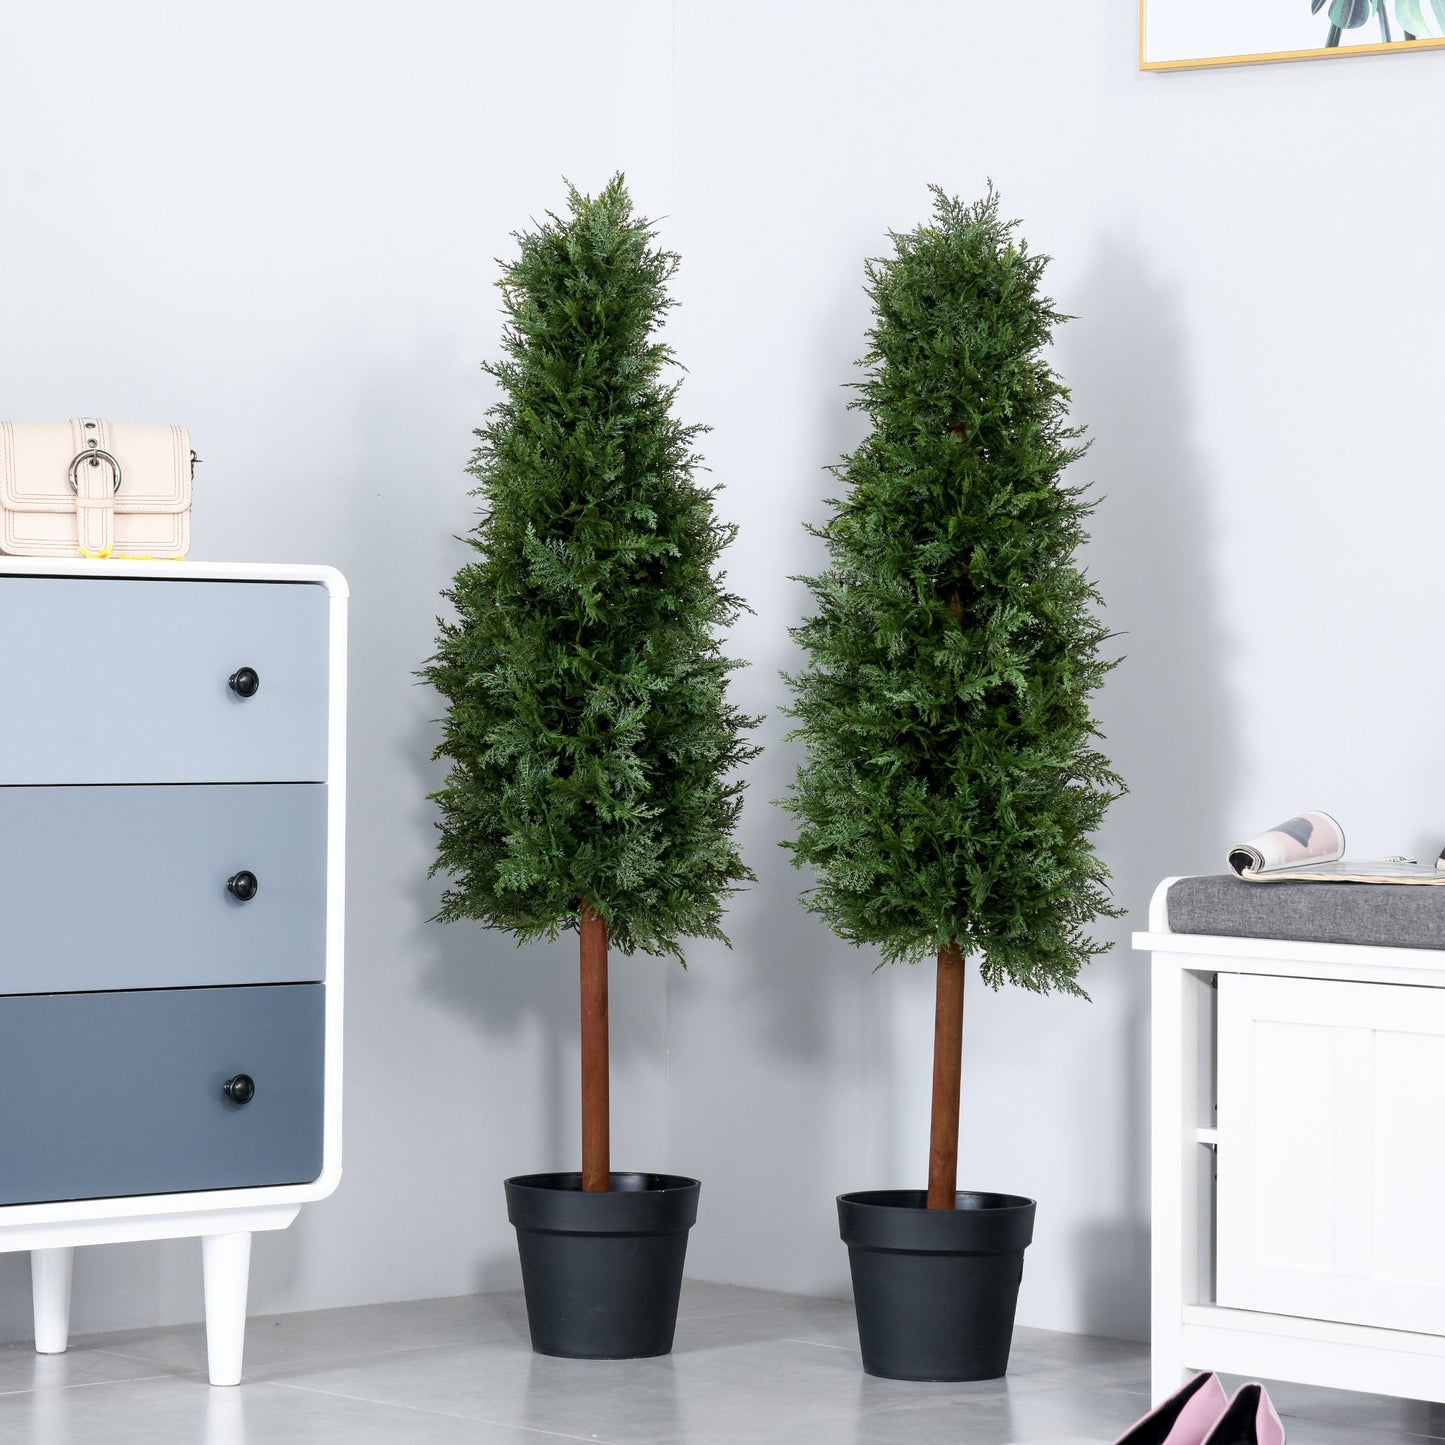 Outsunny Set Of 2 120cm/4FT Artificial Cedar Pine Trees Decorative Cypress Plant Fake Conifer Tree w/ Heavy Pot Indoor Outdoor Home Office